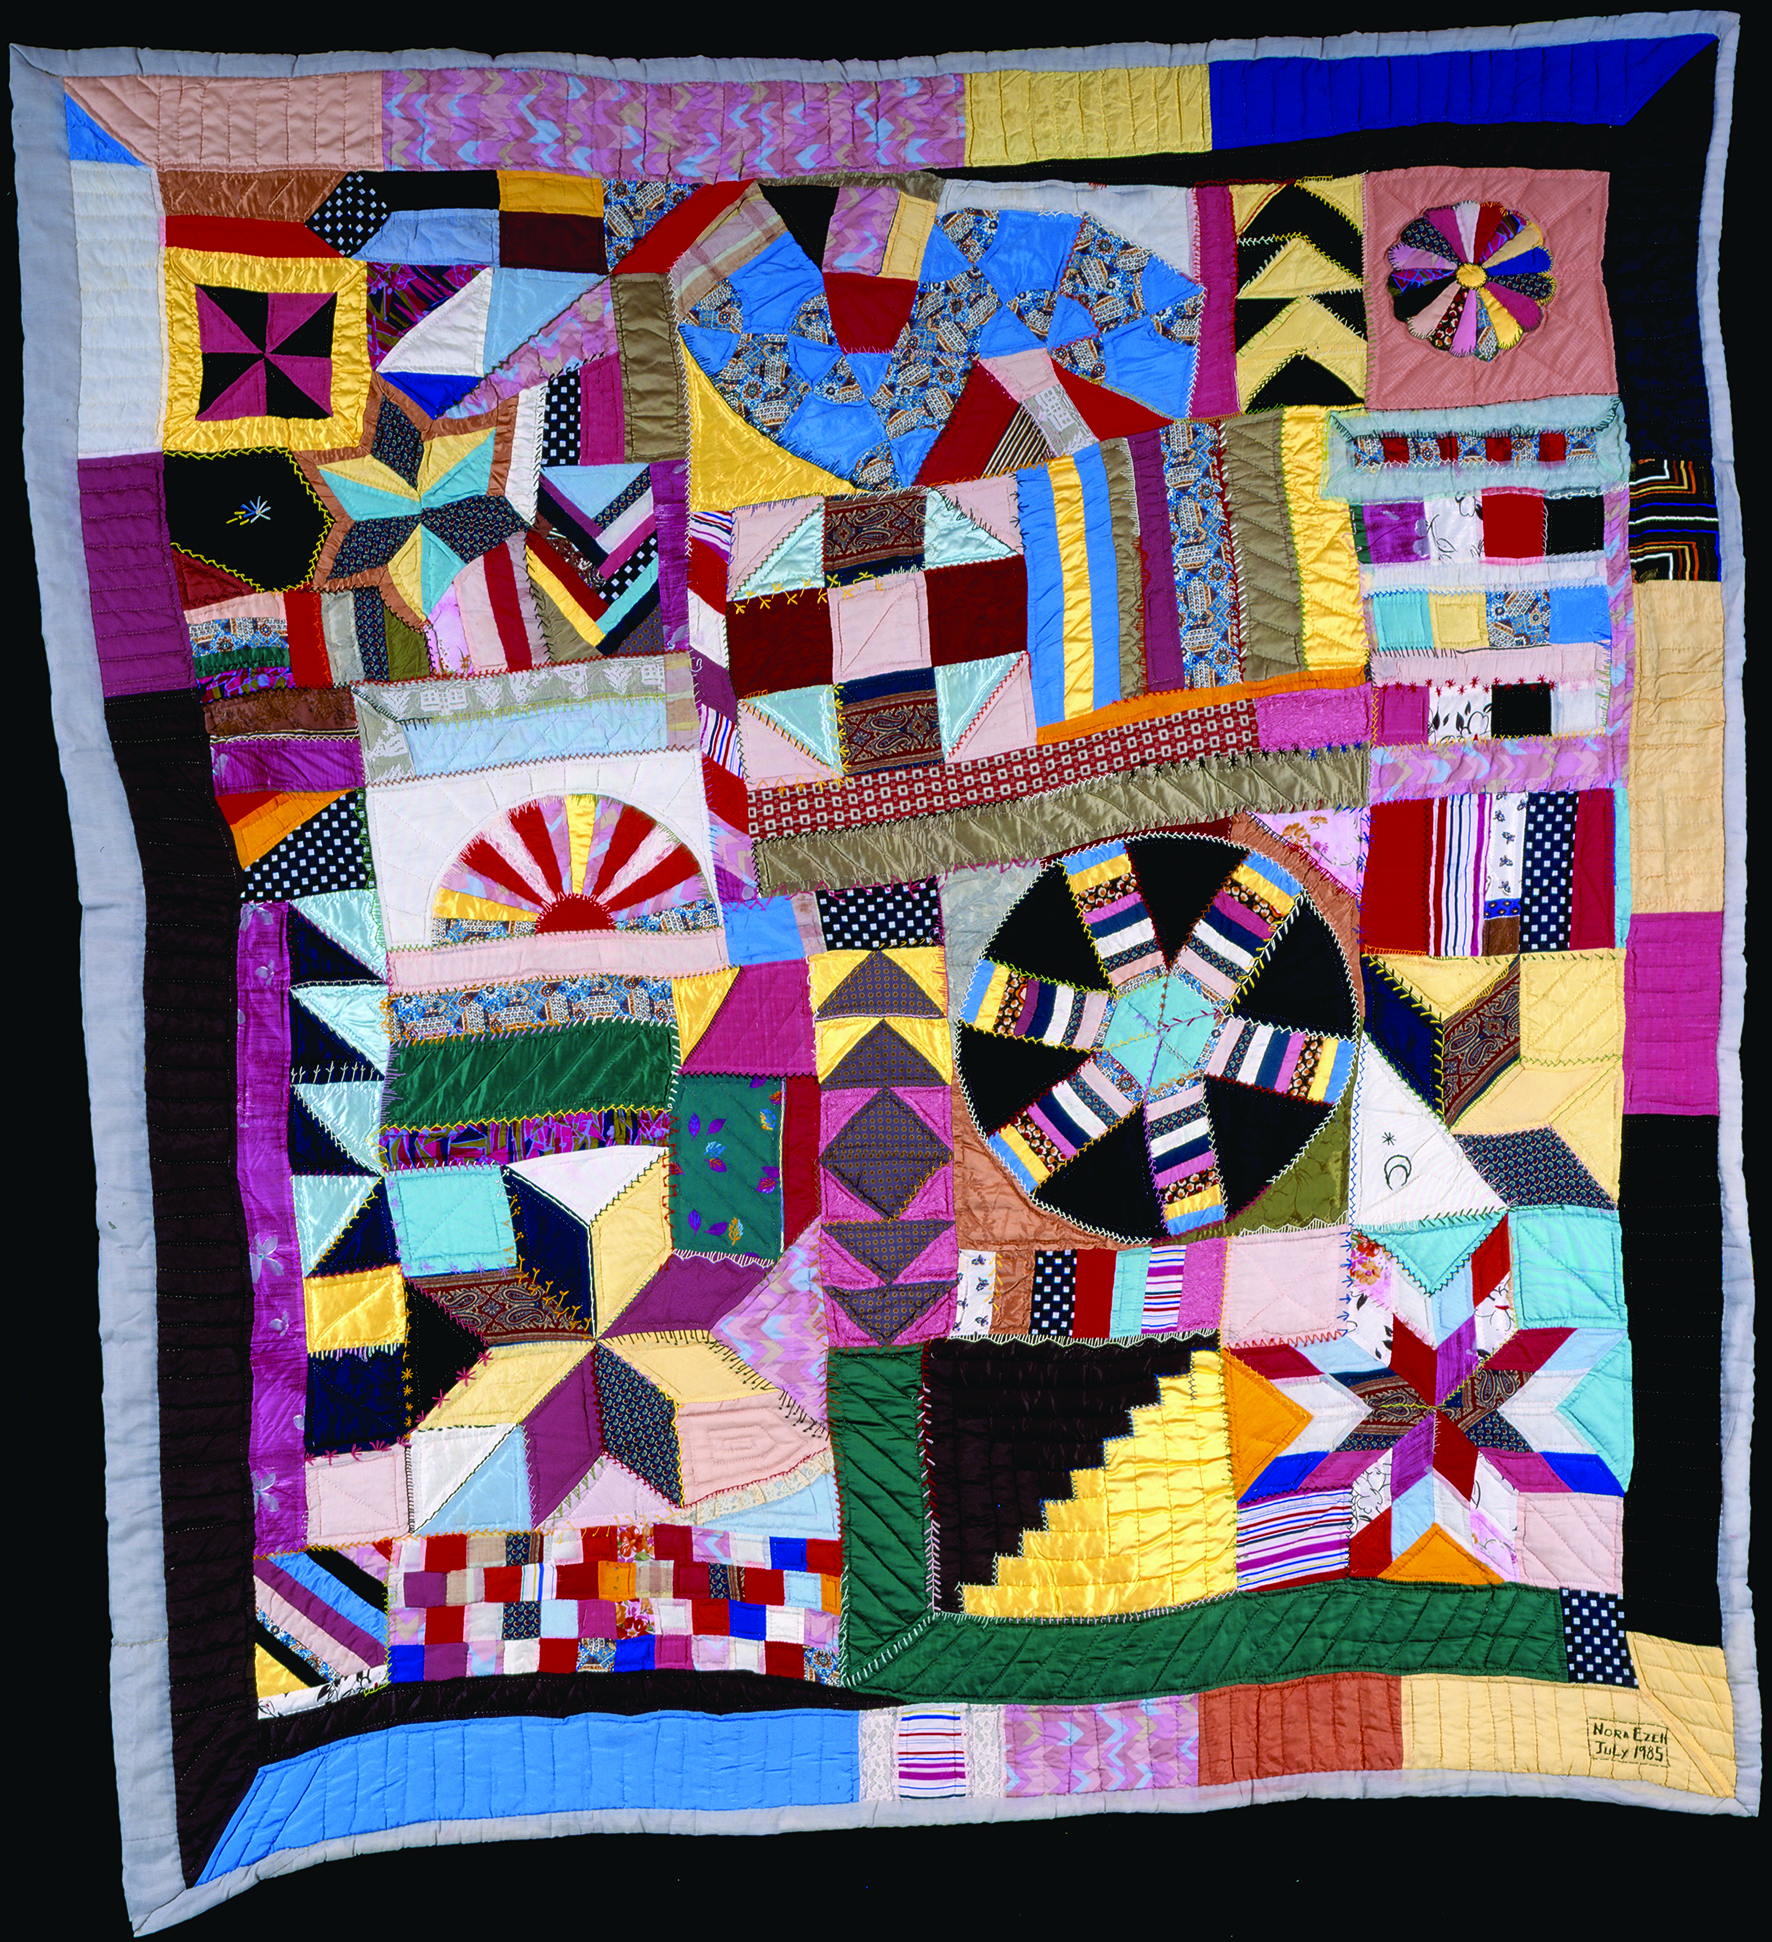 The Wick - Everybody Quilt by Nora Ezell, 1985. Made in Greene County, Alabama